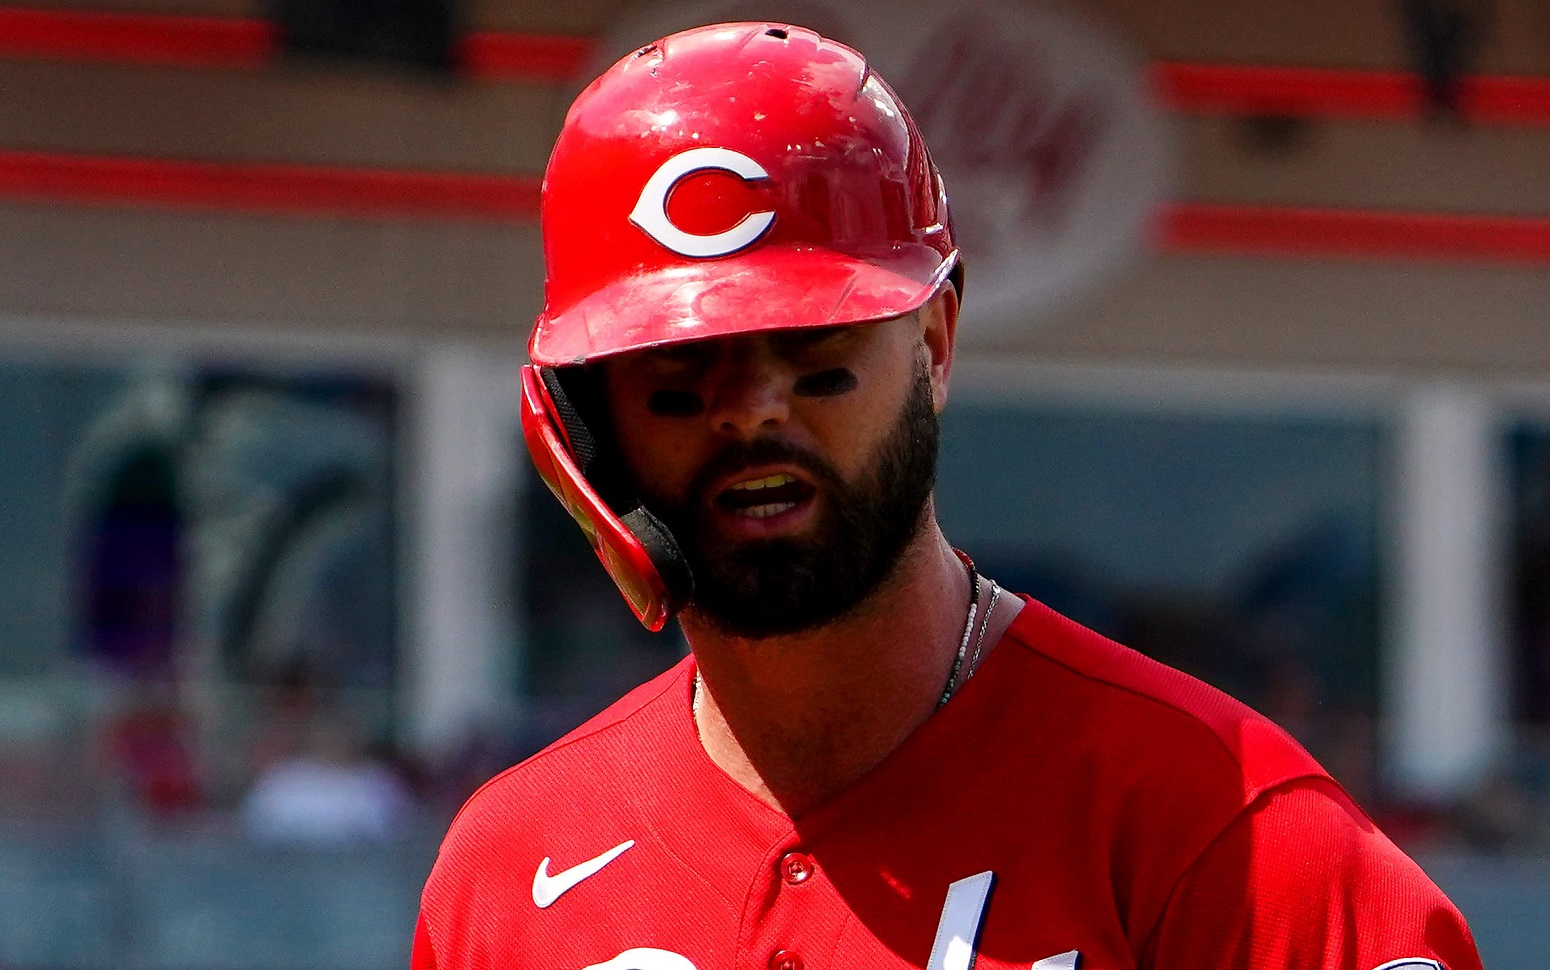 Mariners to acquire Jesse Winker, Eugenio Suárez from Reds, per